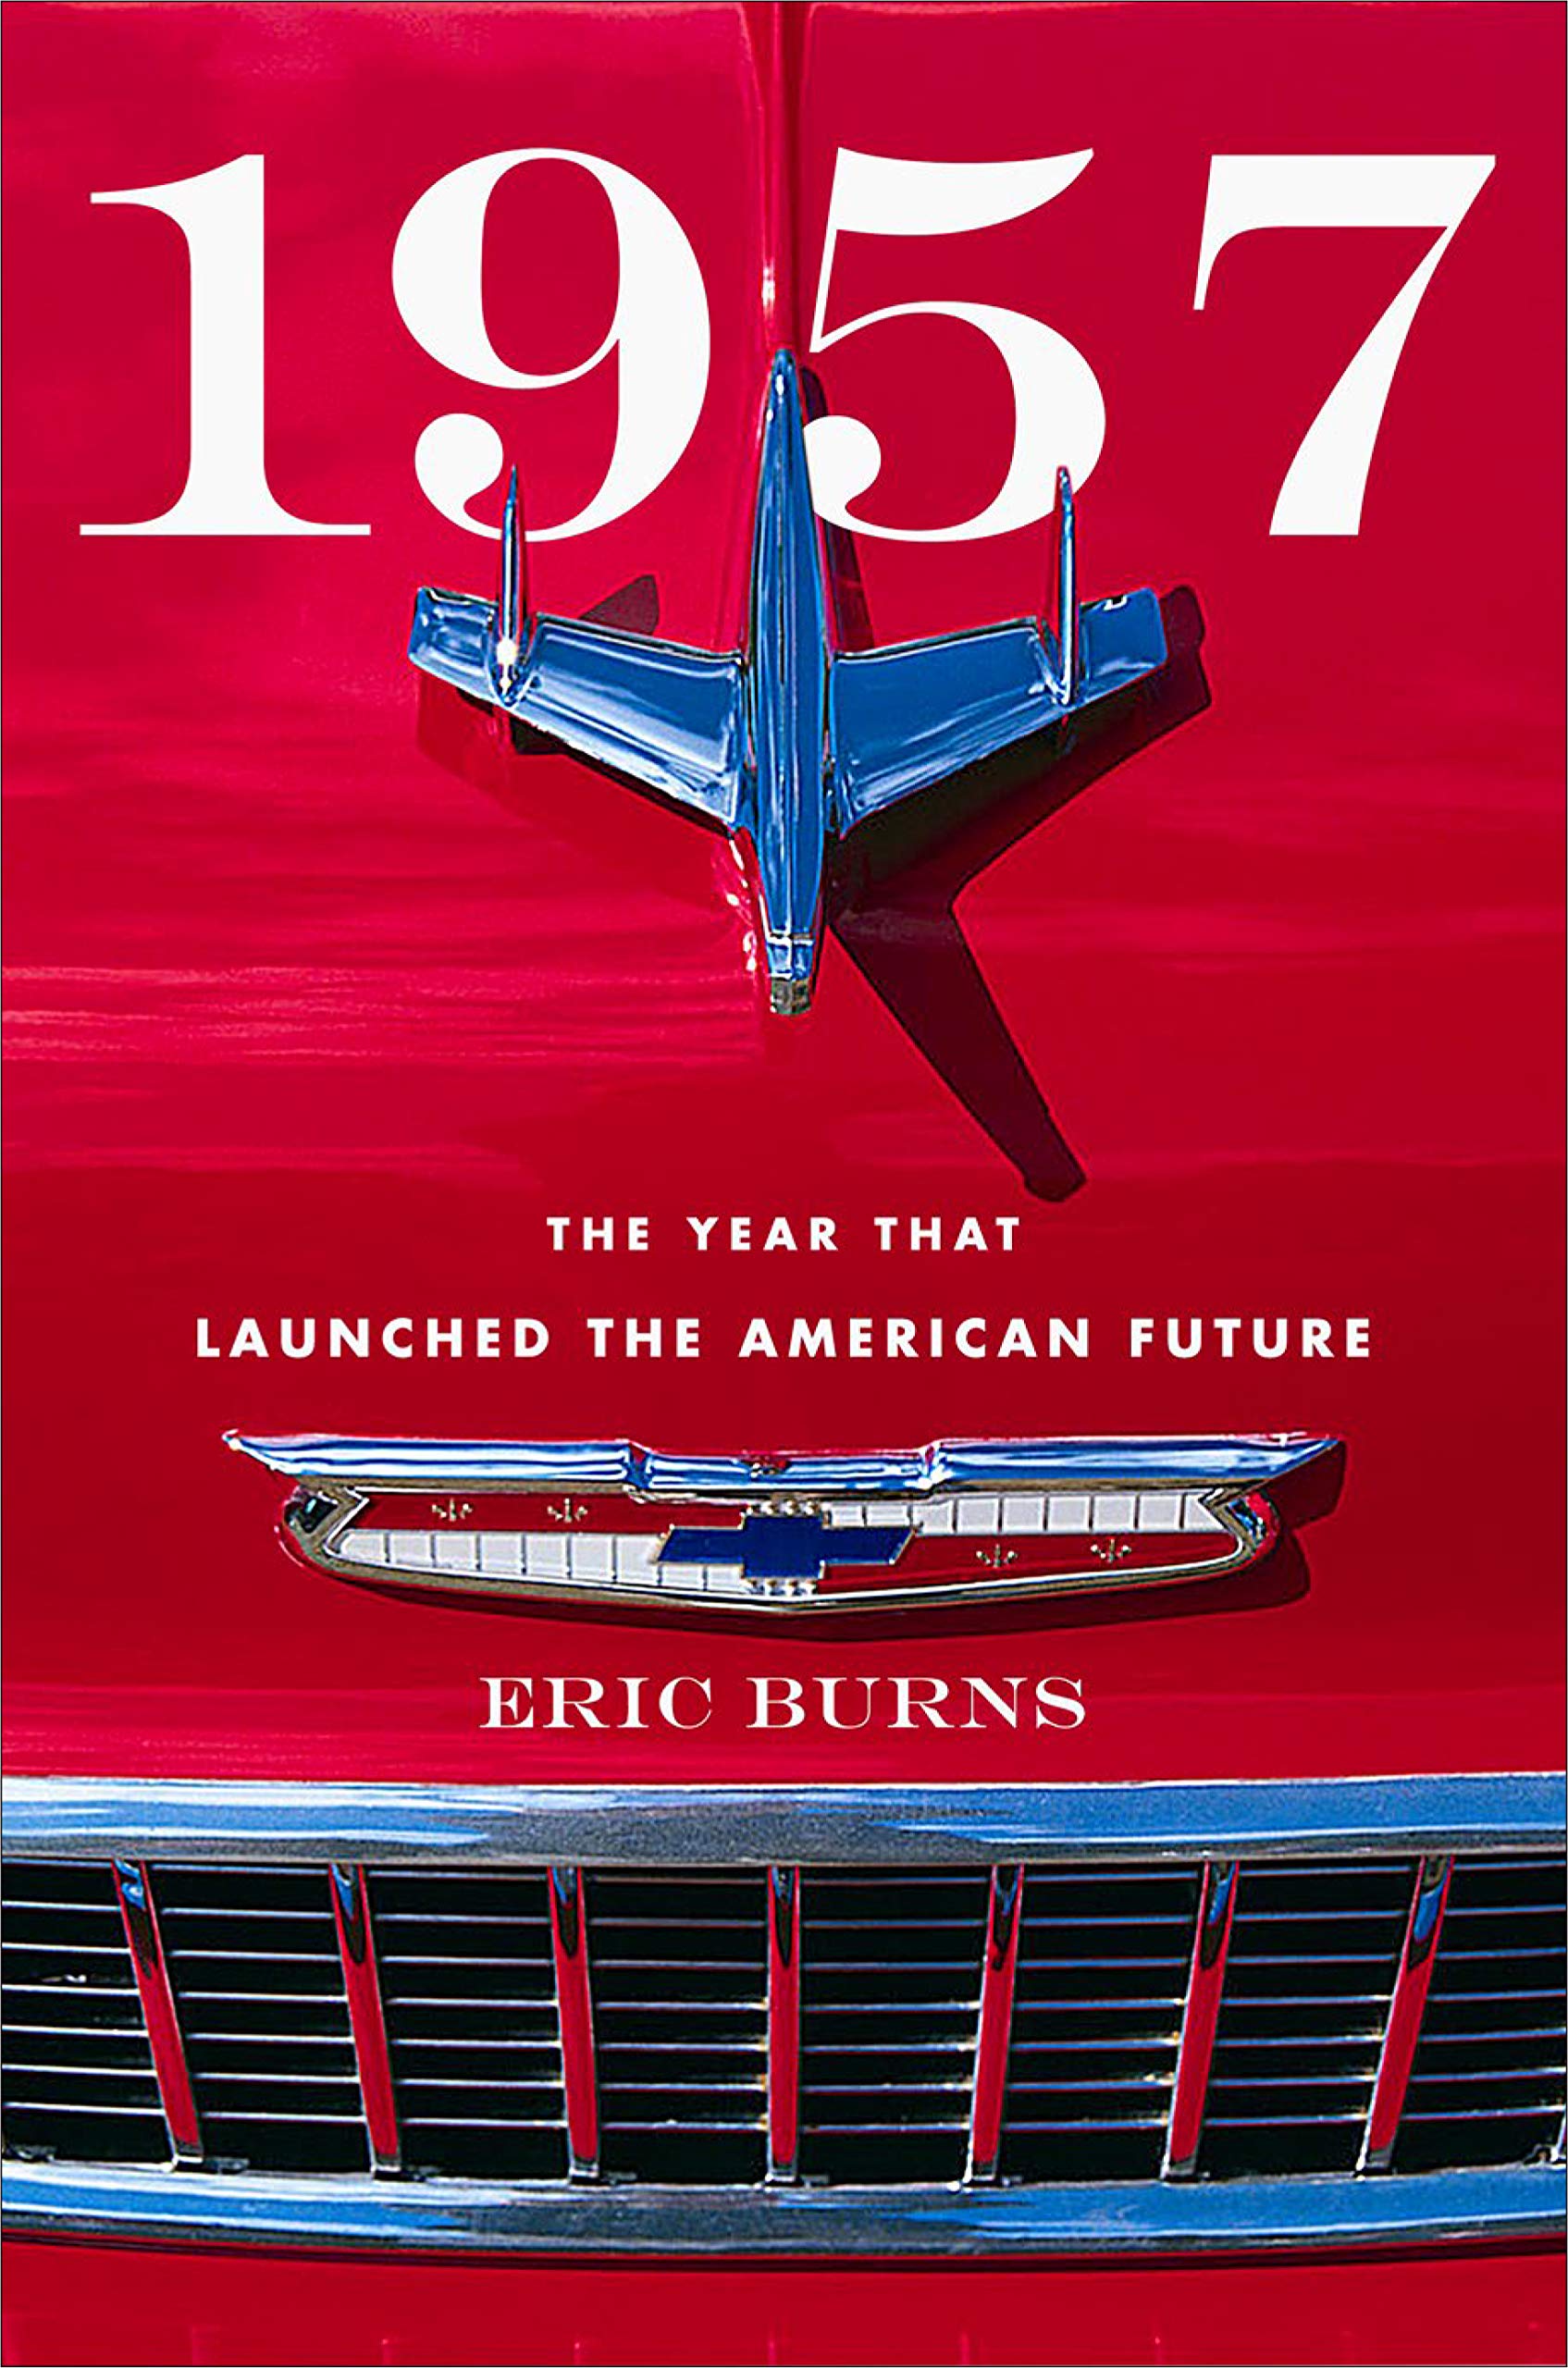 1957: The Year That Launched the American Future